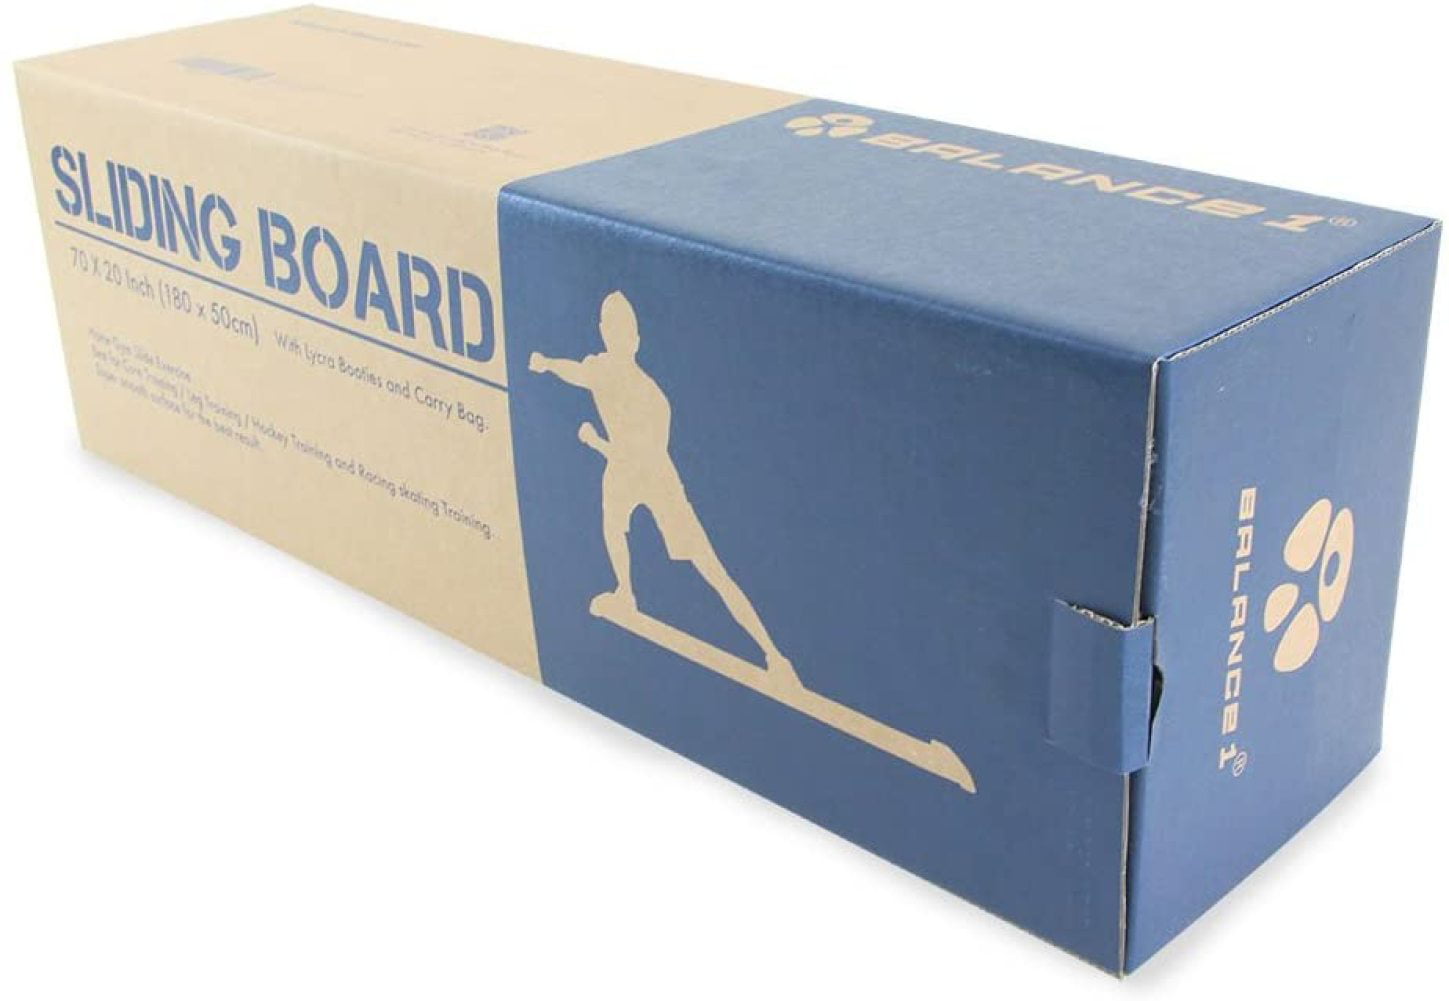 Balance 1 Slide Board-70 inch 6FT -Super Smooth Board with Free Lycra Booties! 